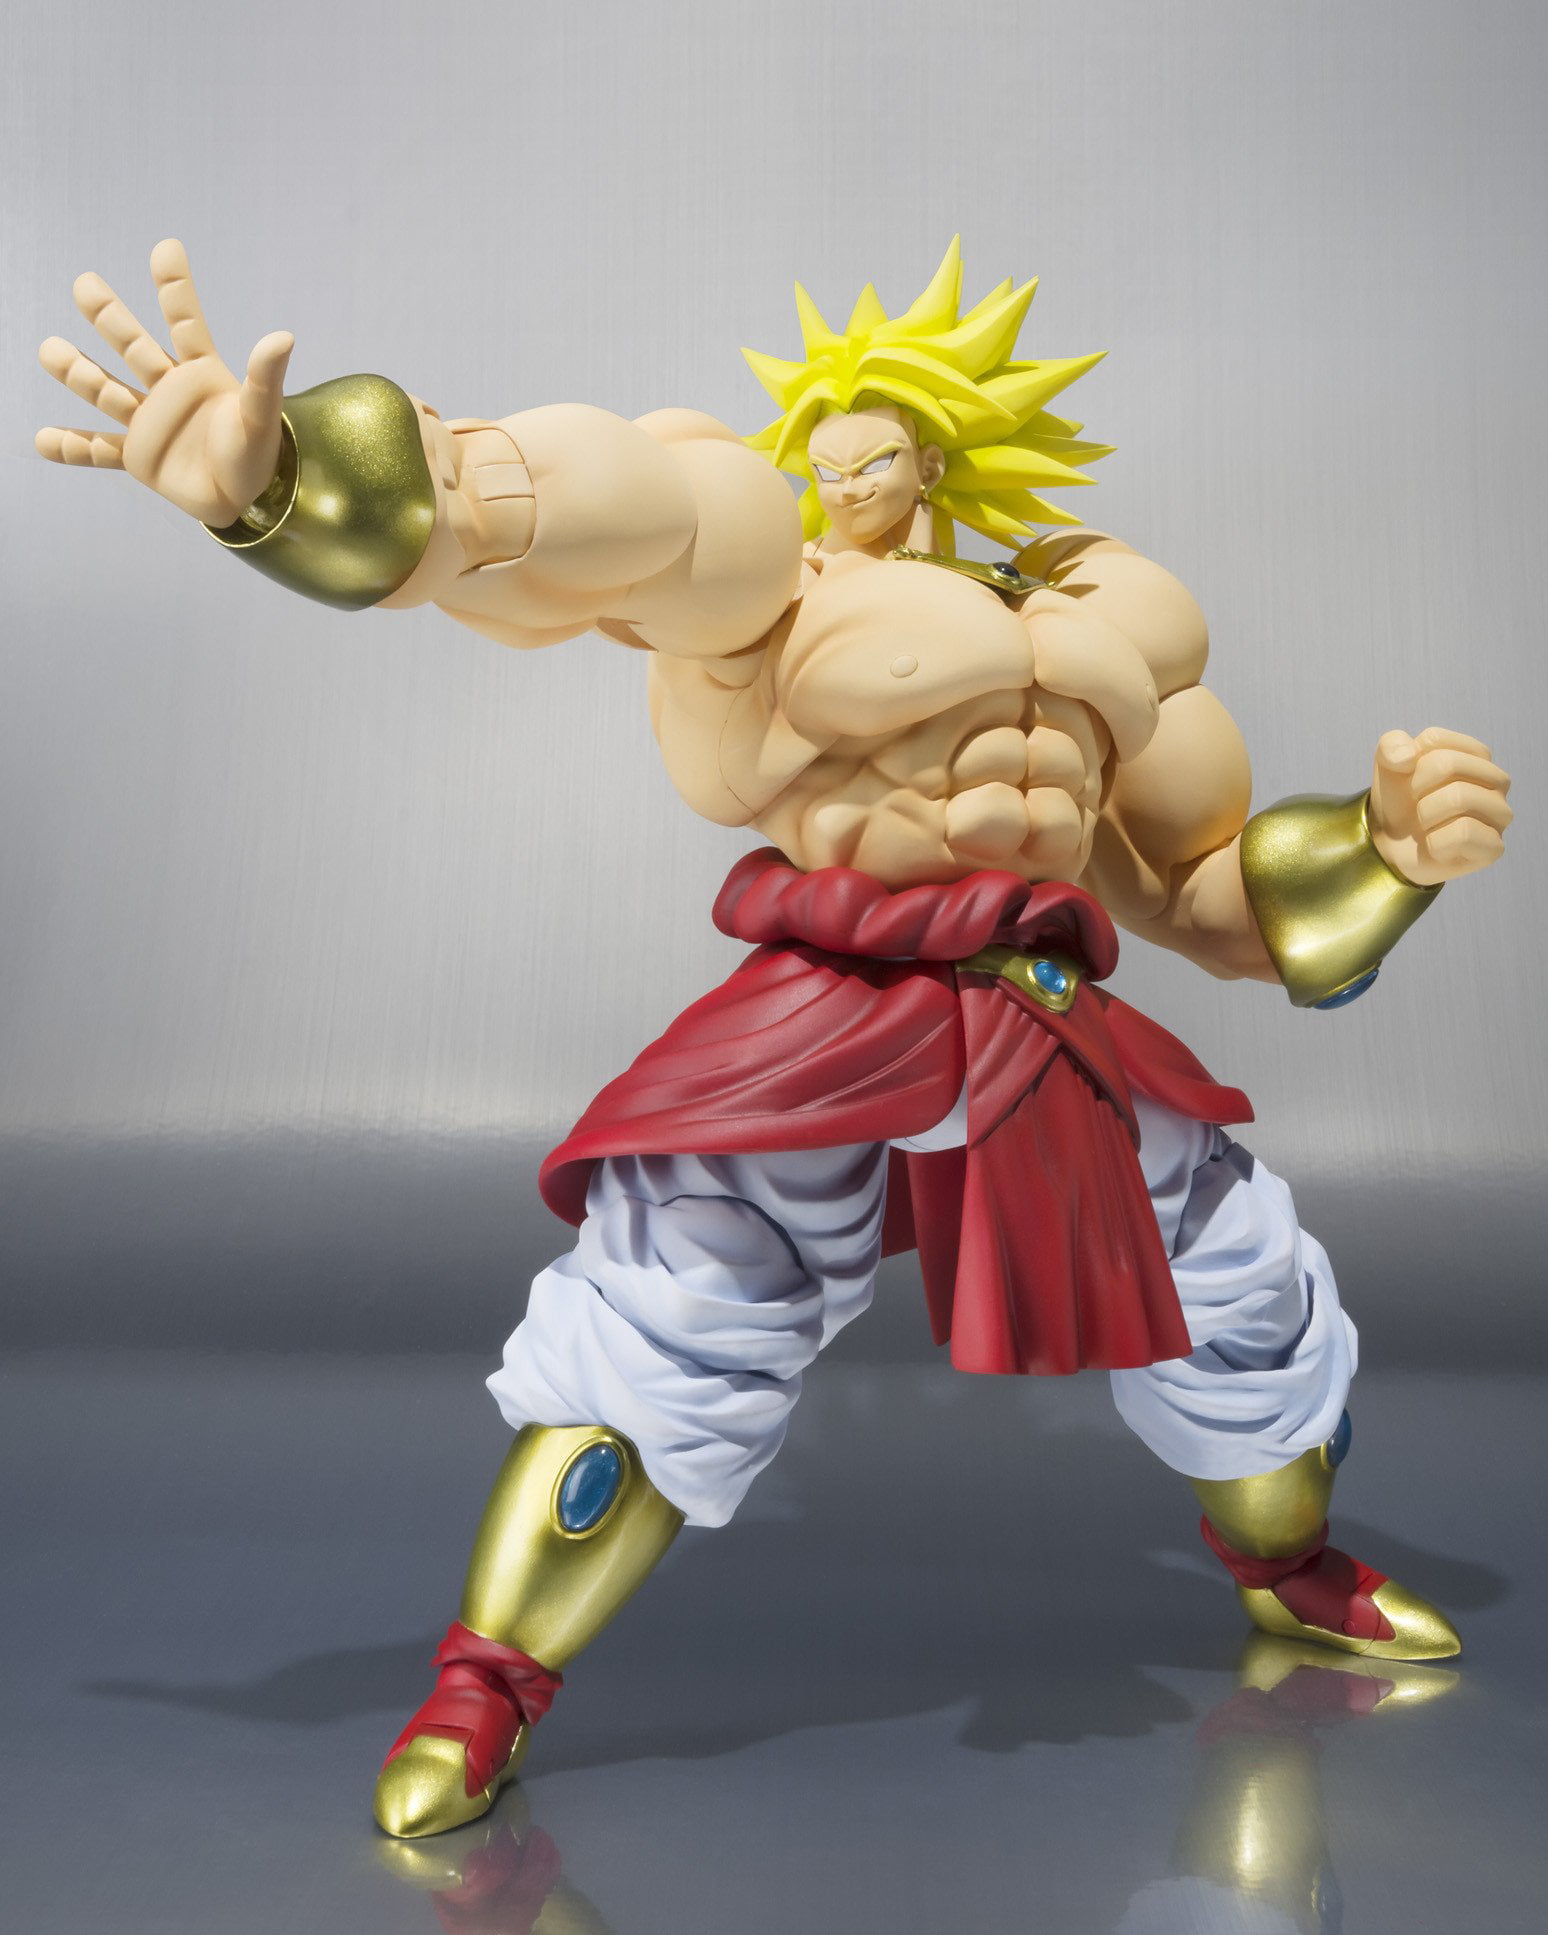 Bandai SH Figuarts SUPER BROLY NYCC DRAGONBALL Z TOY ACTION FIGURE BRAND NEW